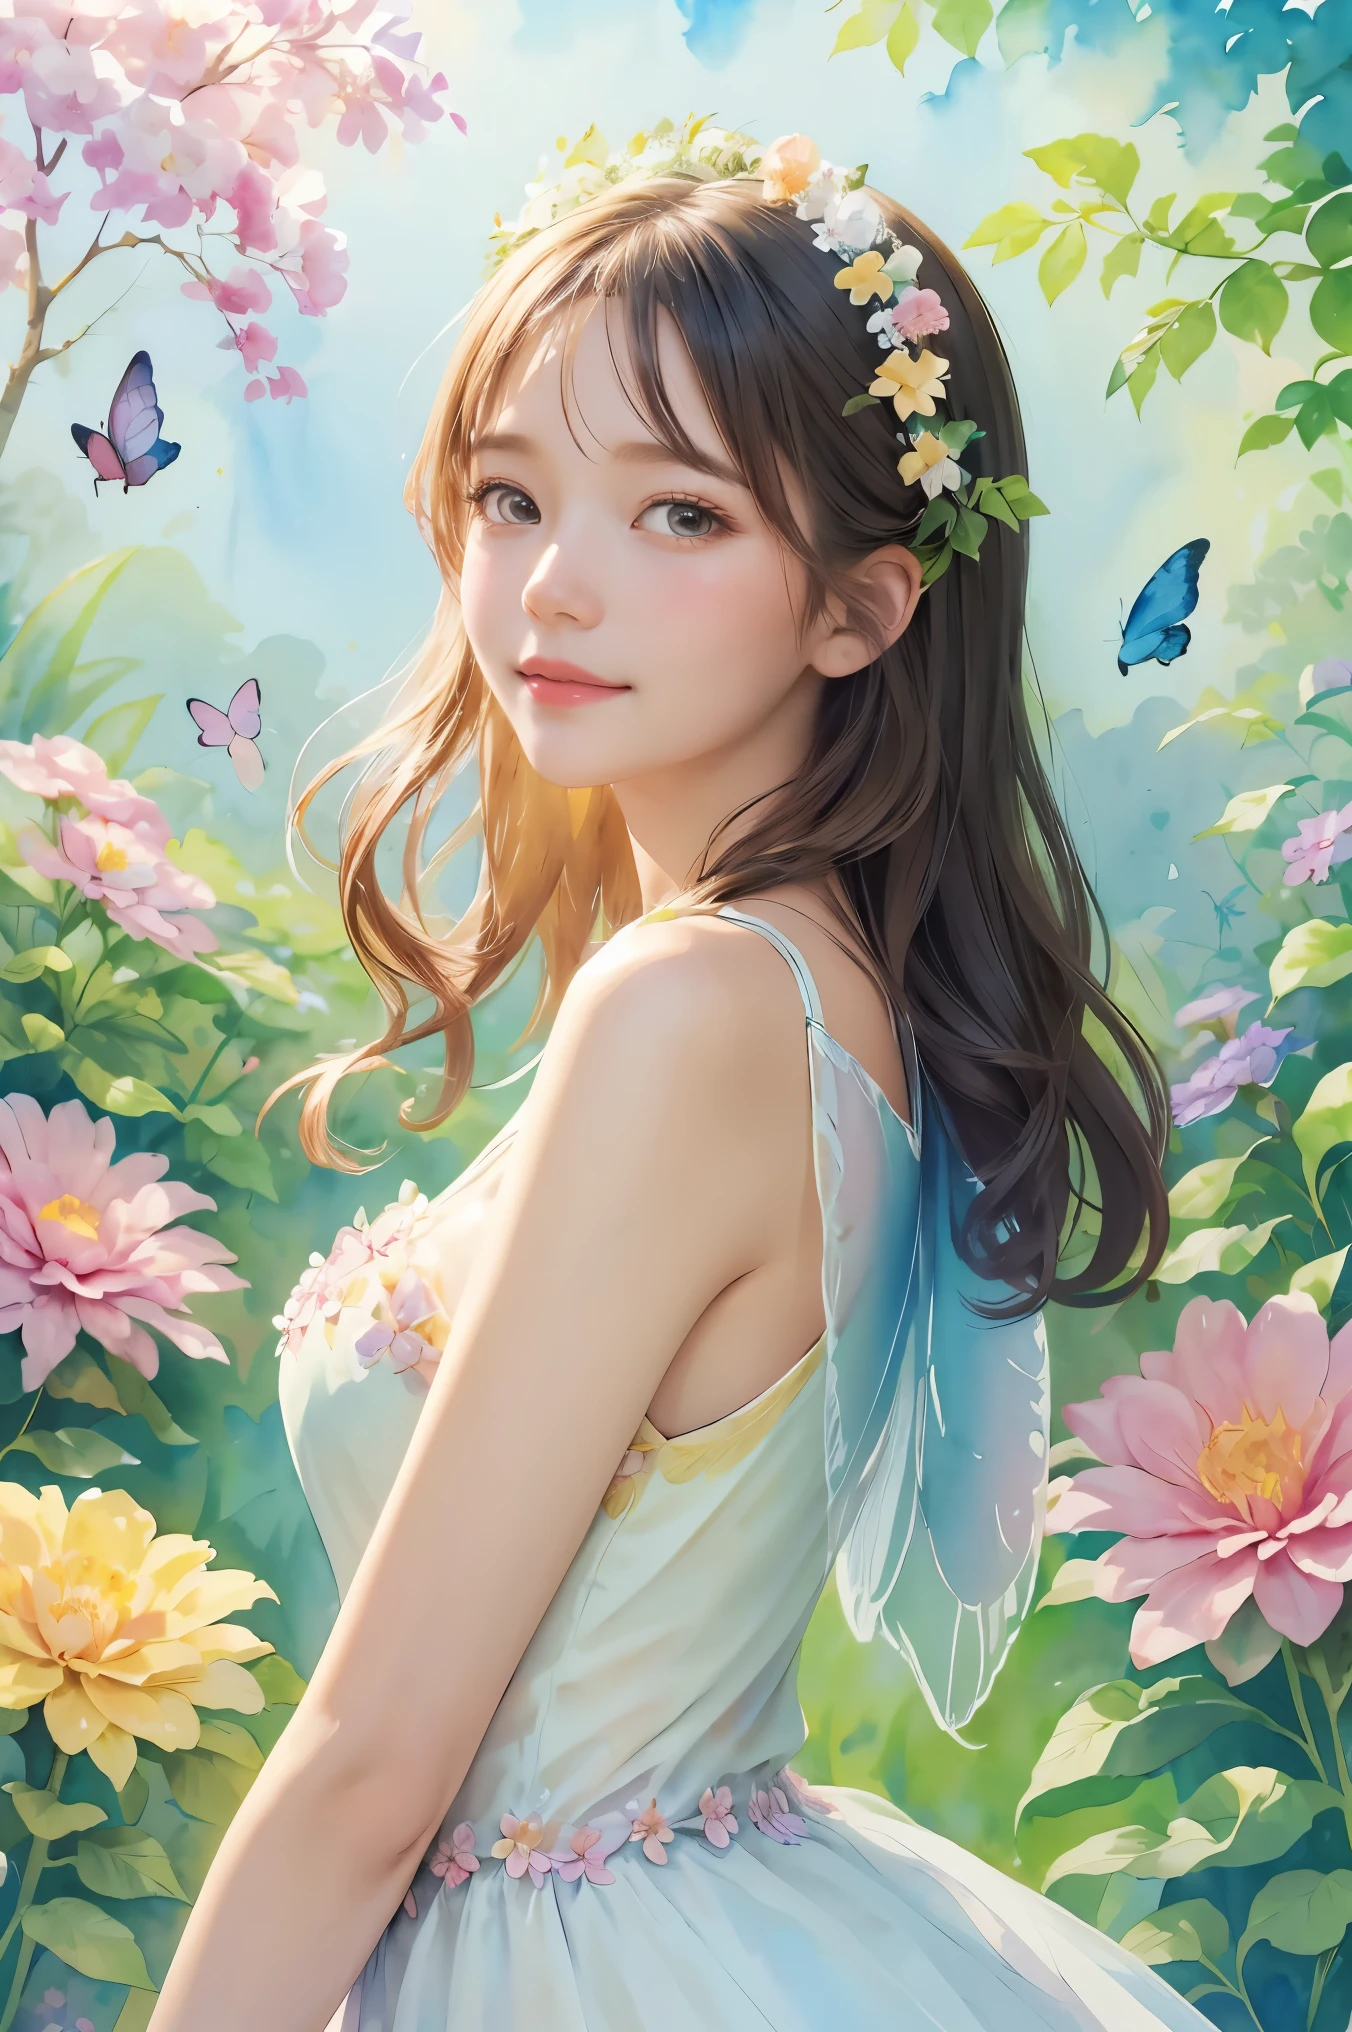 A beautiful girl in a fairy costume, surrounded by flowers and butterflies. Content: watercolor painting. Style: whimsical and delicate, like a children’s book illustration.